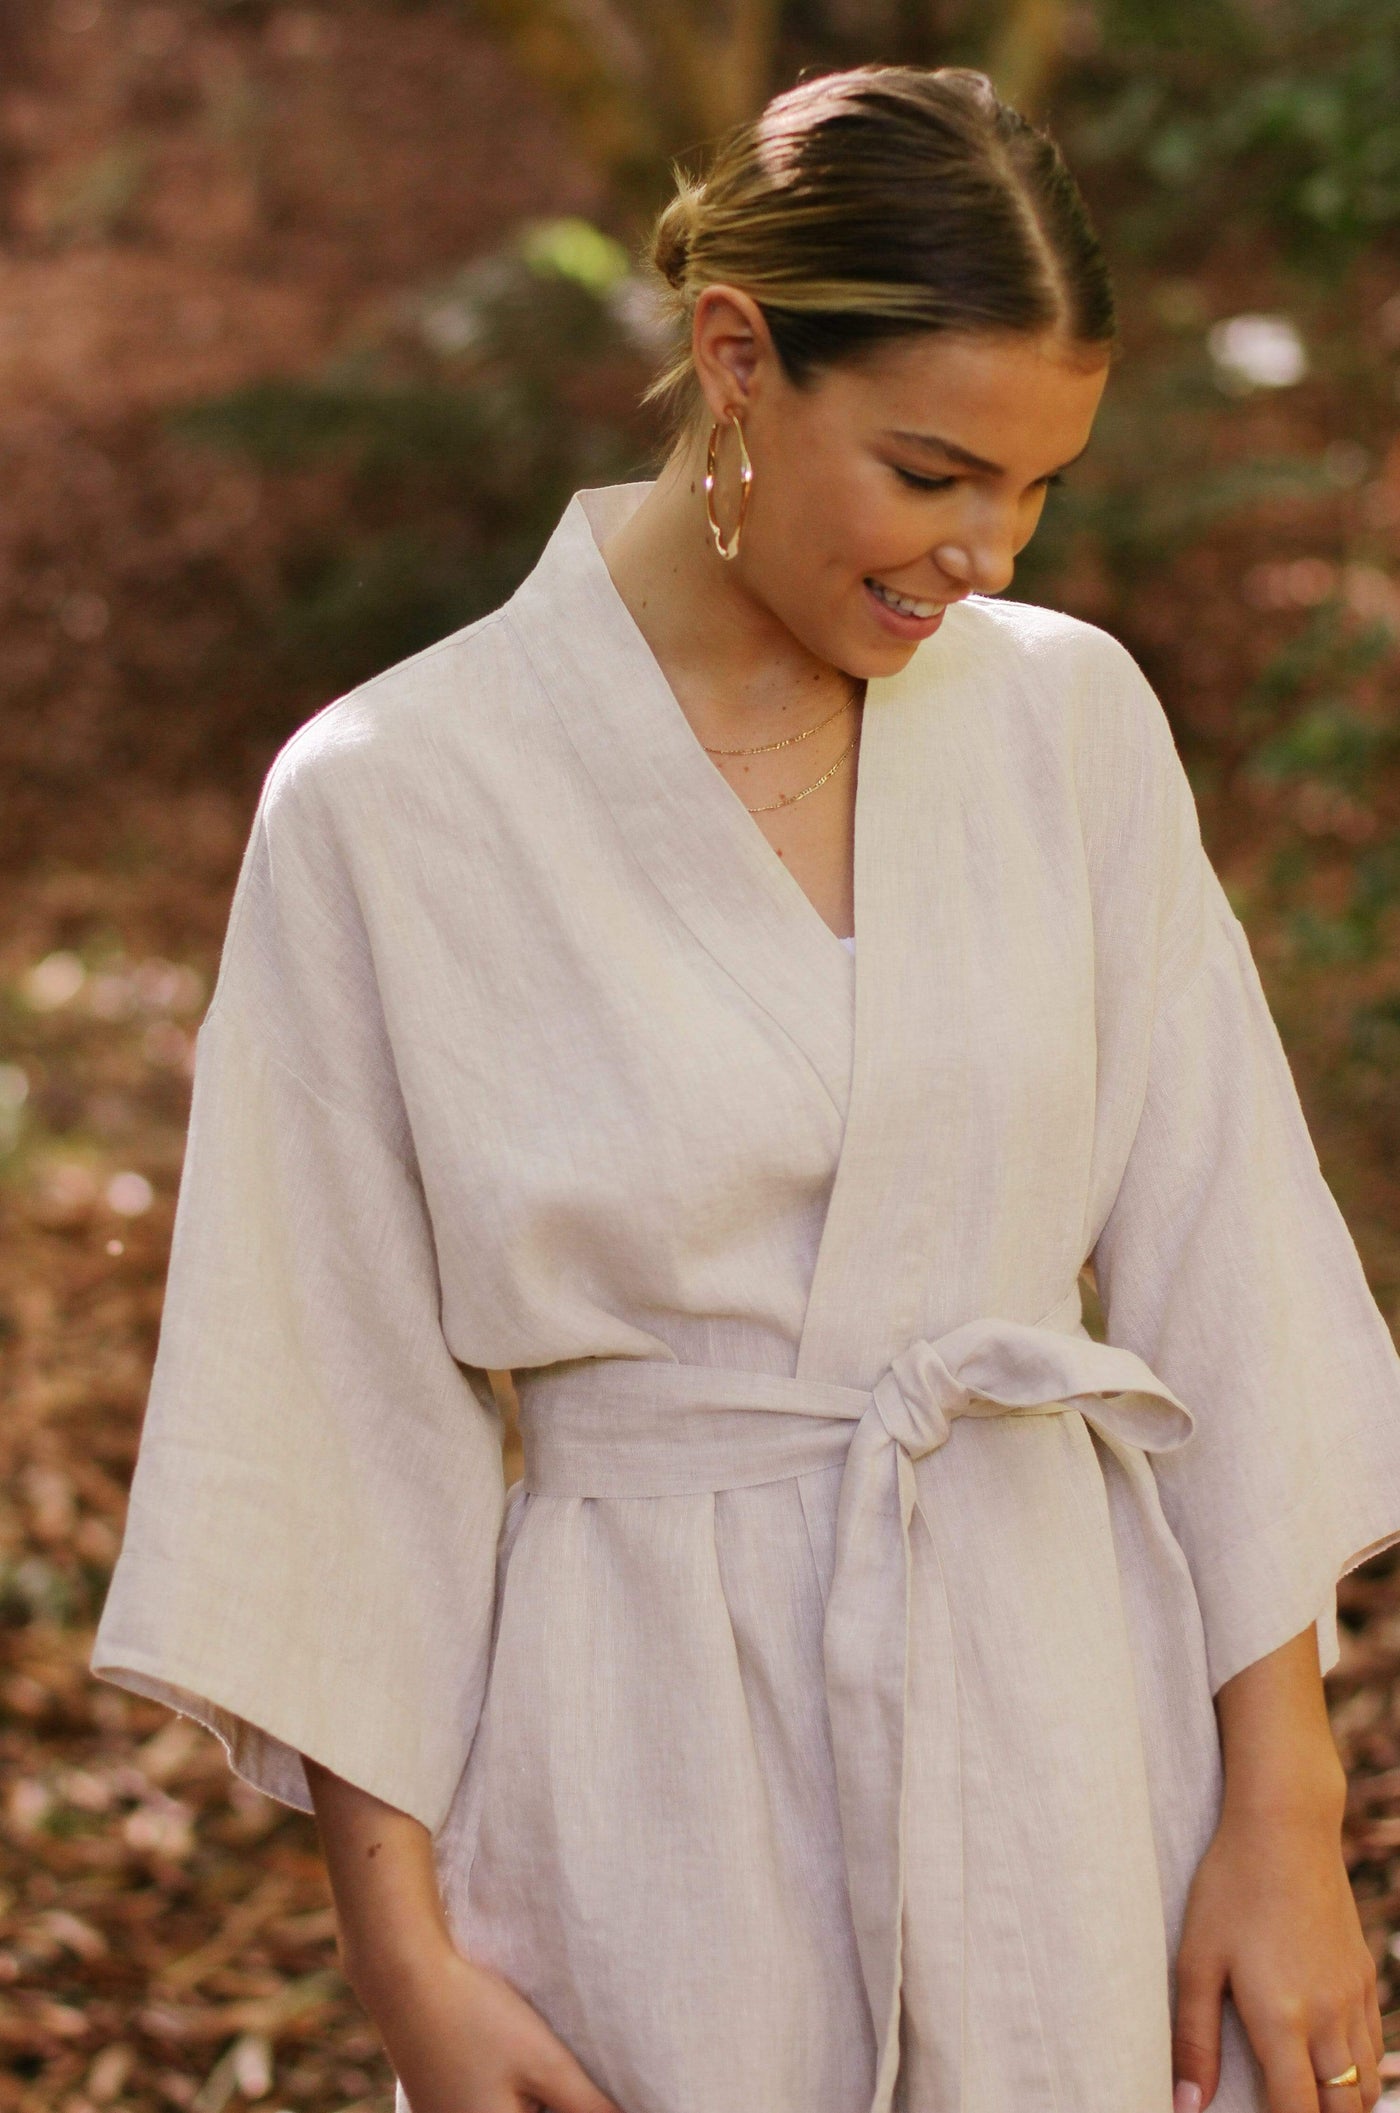 Lilly Pilly Collection 100% organic linen Summer Kimono in Oatmeal